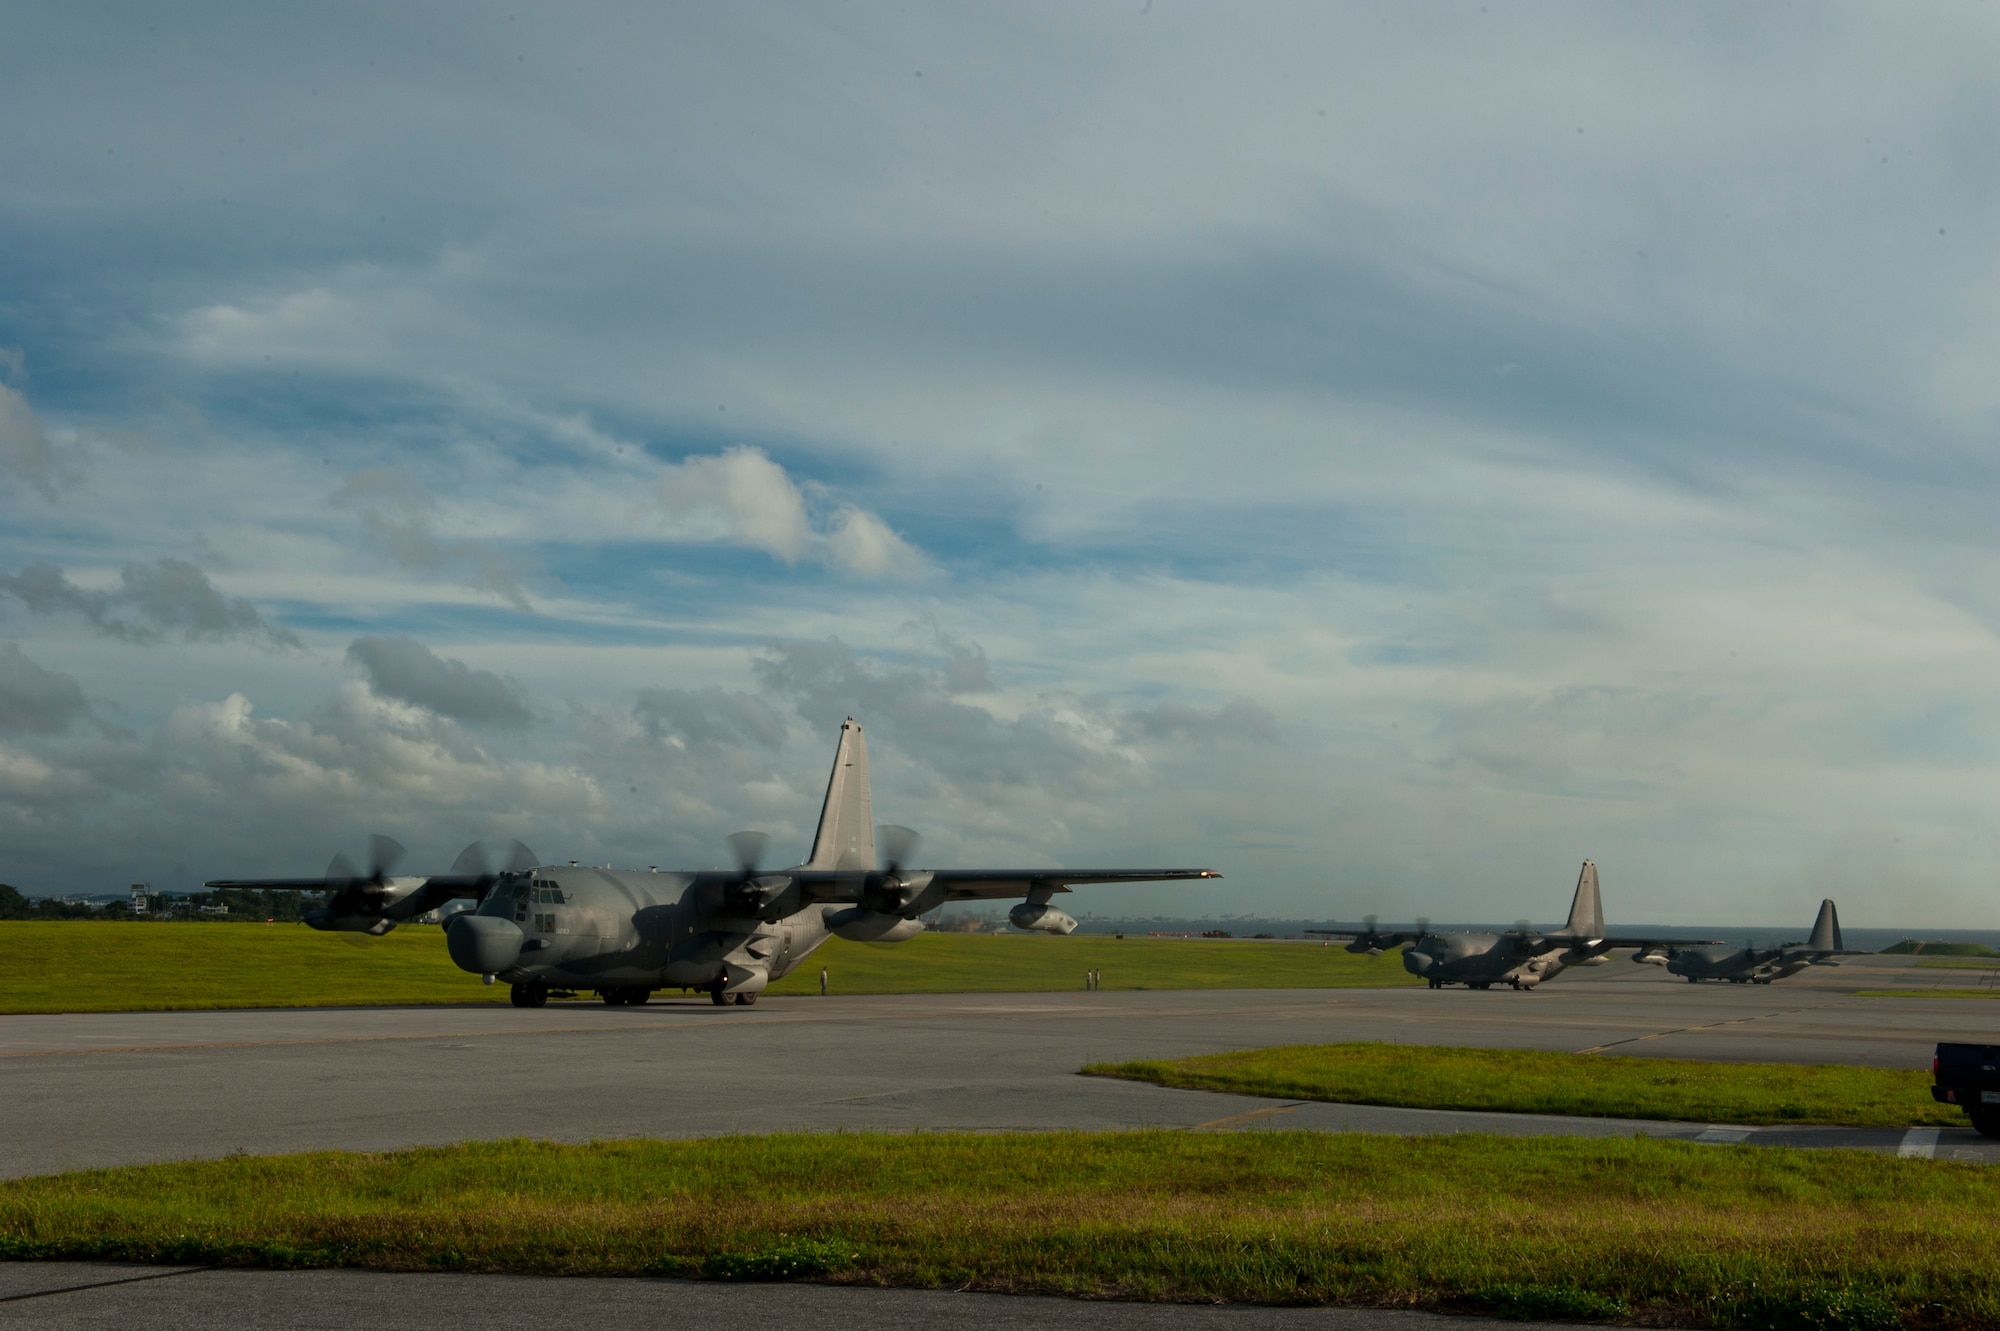 Three U.S. Air Force MC-130H Combat Talon IIs from the 1st Special Operations Squadron taxi in line on the Kadena Air Base, Japan, flightline May 14, 2015. The 1st Special Operations Squadron operates the MC-130H providing infiltration, exfiltration, and resupply of special operations forces and equipment in hostile or denied territory.  By conducting formation flight, aircrews and maintainers test and validate their ability to efficiently generate aircraft and to quickly infiltrate and exfiltrate large numbers of ground forces. (U.S. Air Force photo by Senior Airman Stephen G. Eigel)